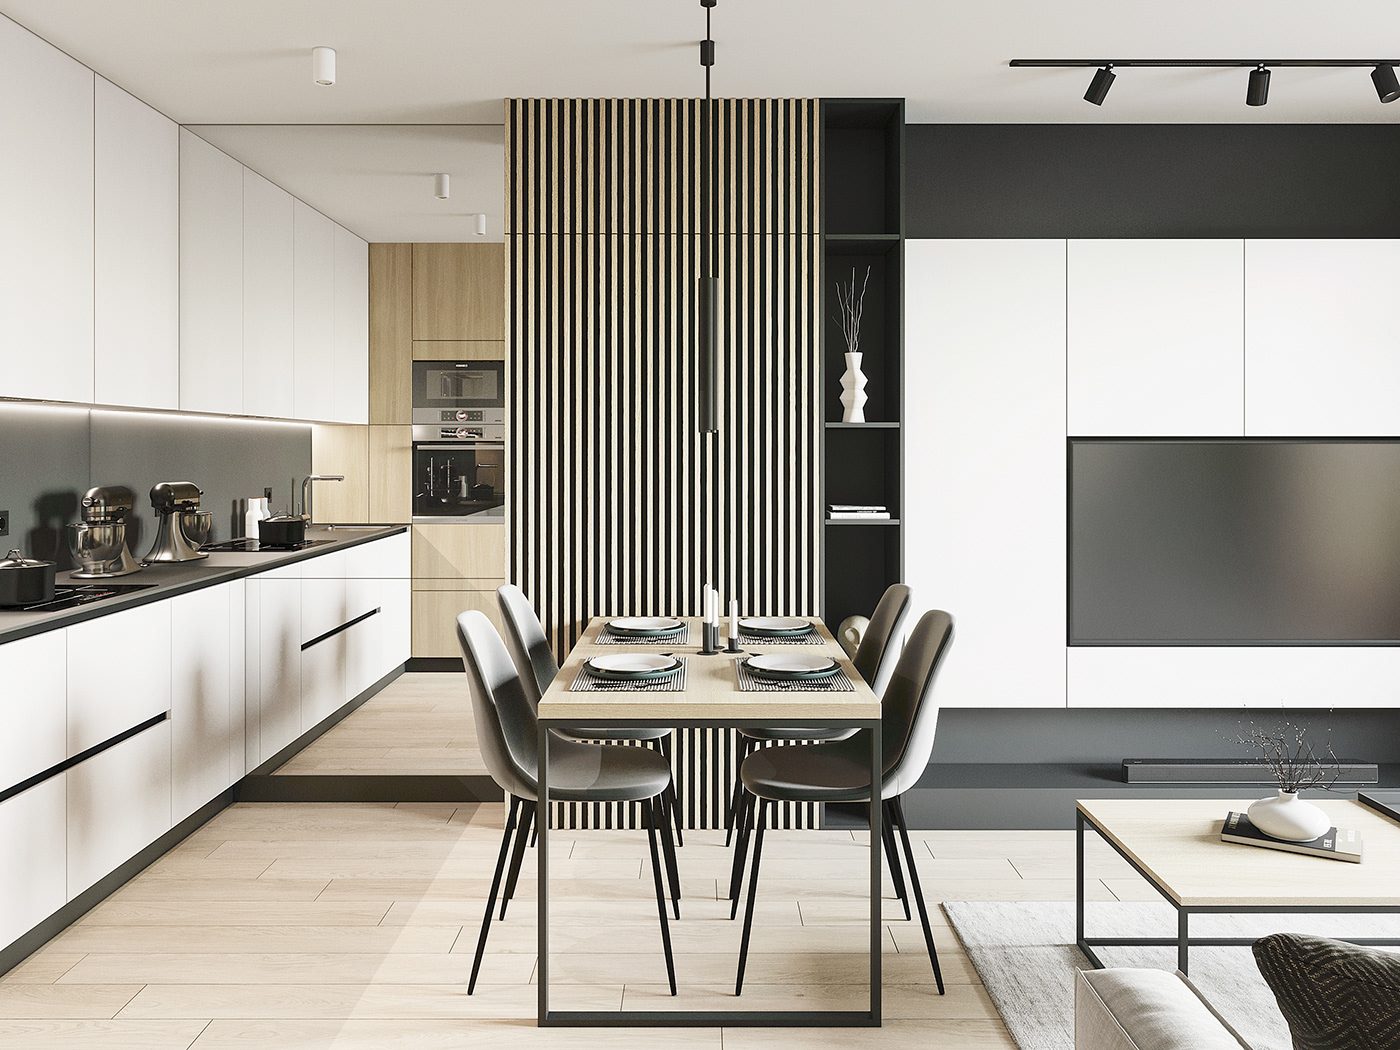 The stratification of three colors white, beige, and black creates a visually appealing effect. Wood grain floors blend in beautifully with the walls, cabinets, and tabletop.